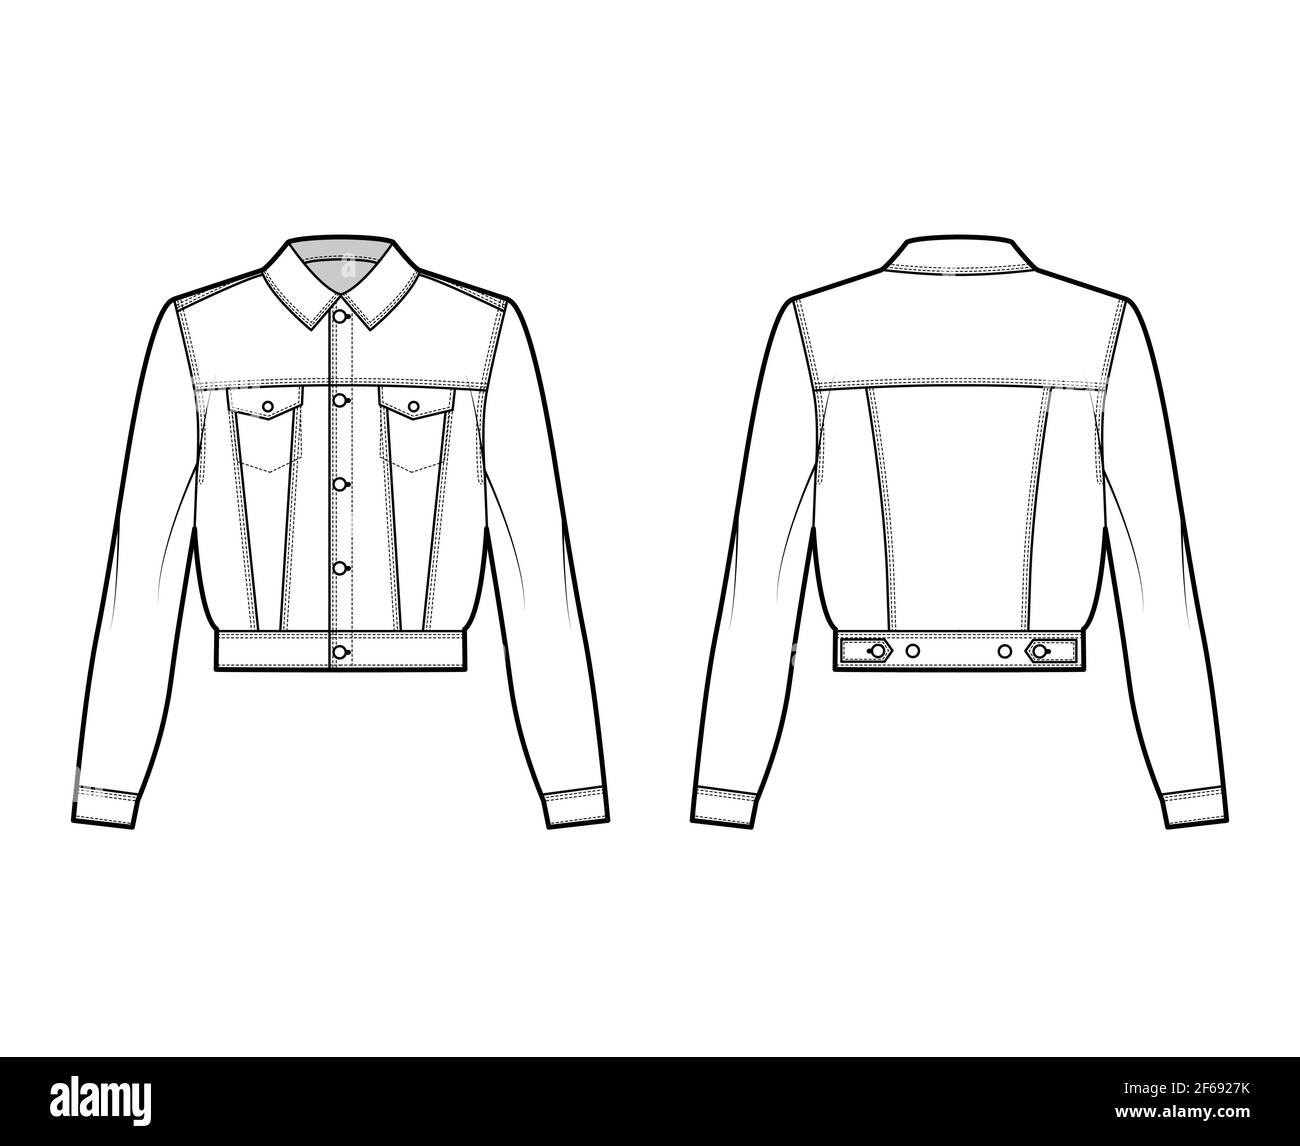 Cropped denim jacket technical fashion illustration with full waist length, flap pockets, button closure, collar, long sleeves. Flat apparel front, back, white color style. Women men unisex CAD mockup Stock Vector